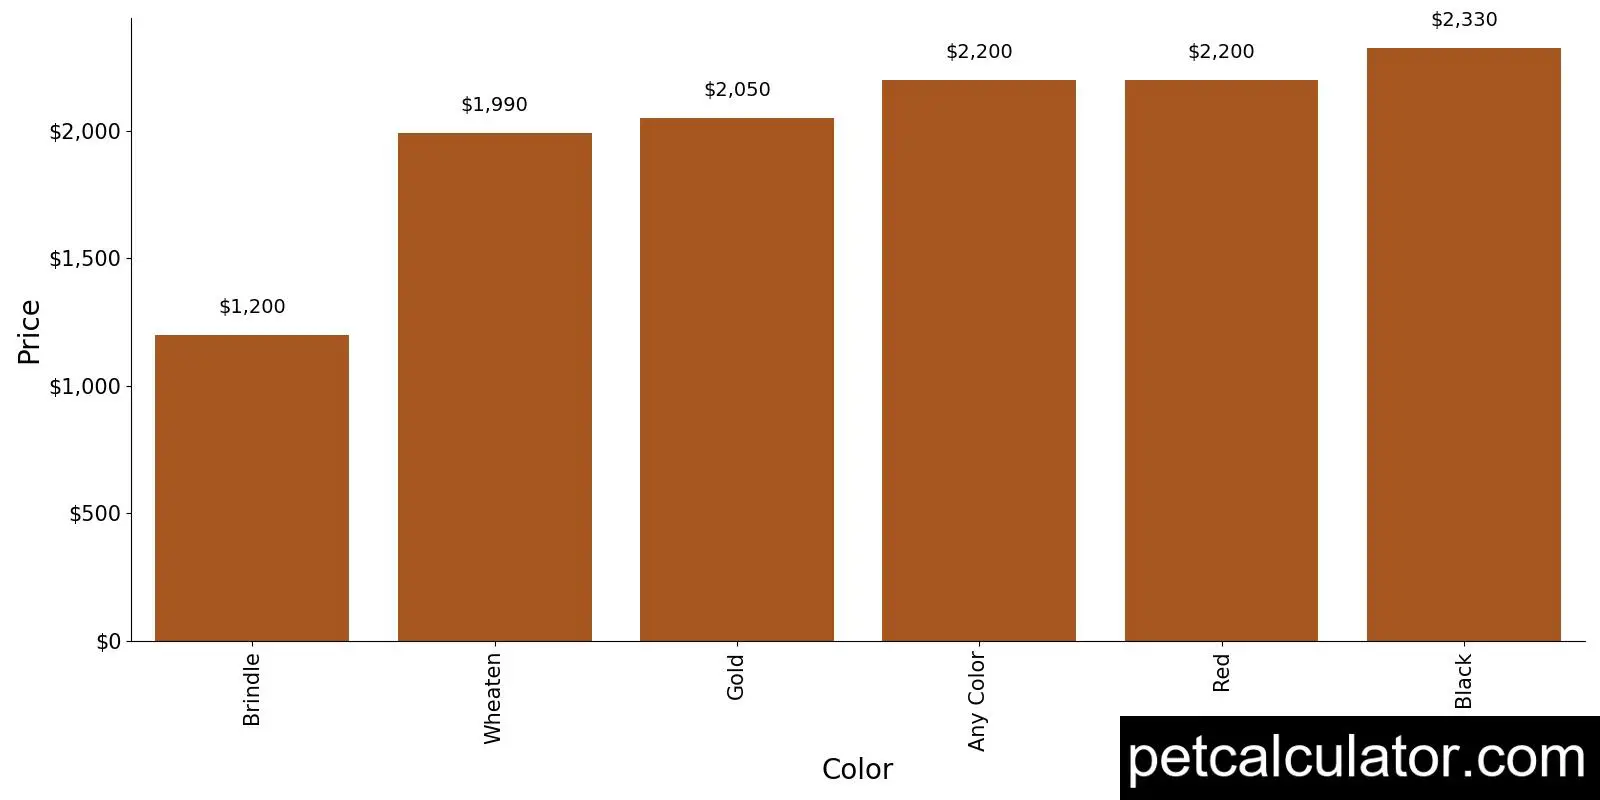 Price of Norwich Terrier by Color 